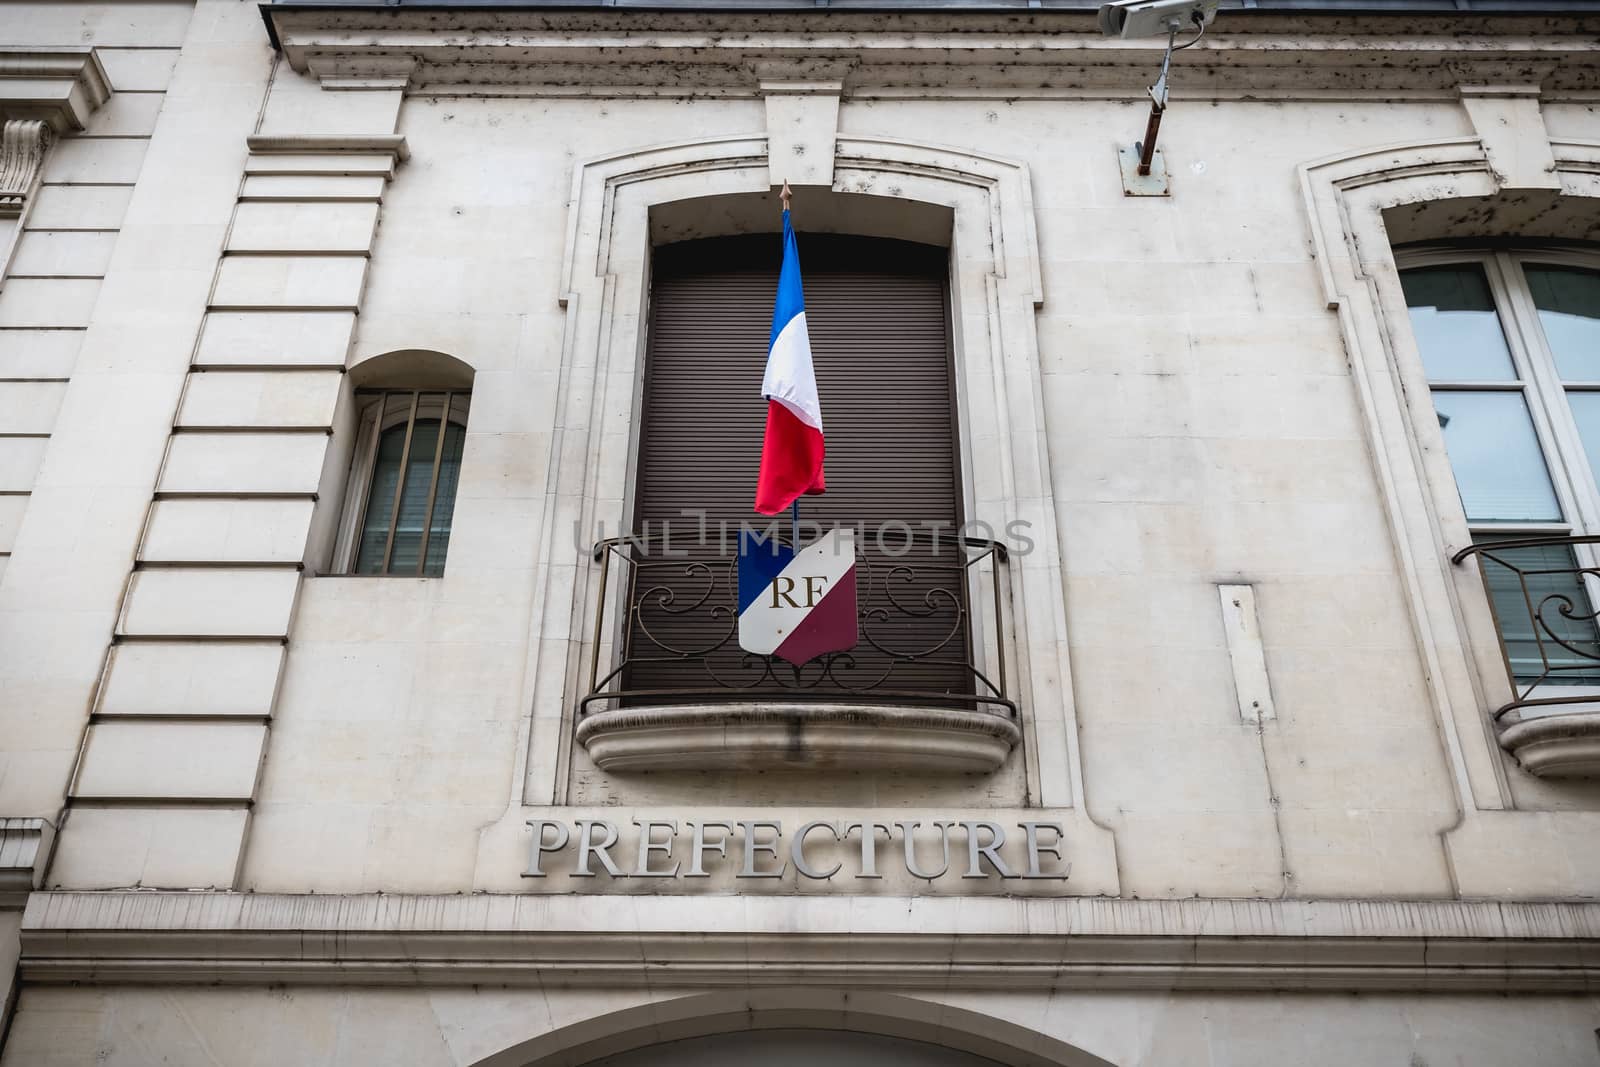 Tours, France - February 8, 2020: architectural detail of the prefecture of Indre et Loire on a winter day